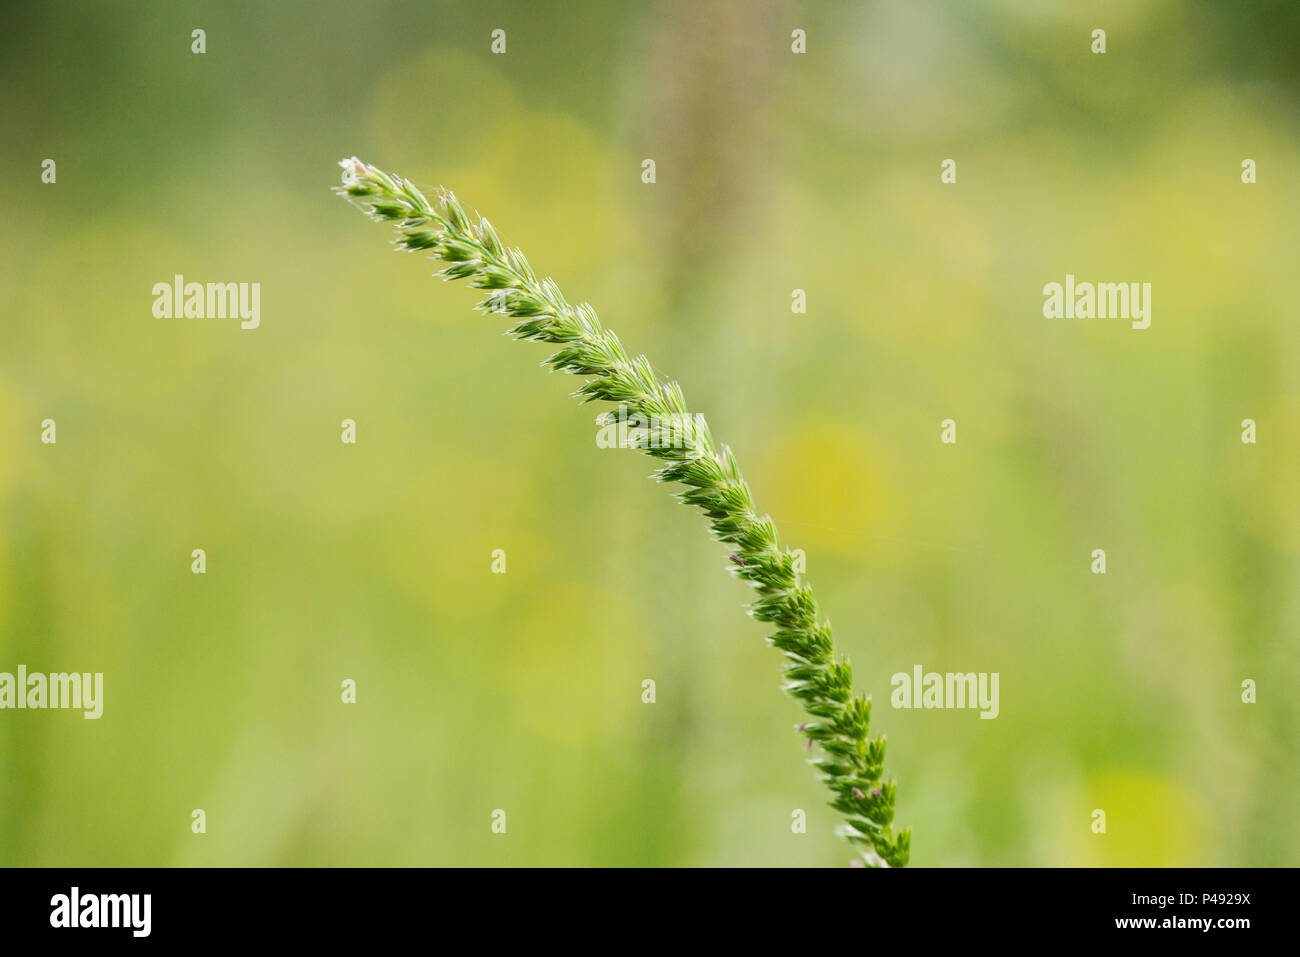 A crested dog's-tail grass (Cynosurus cristatus) seed head Stock Photo